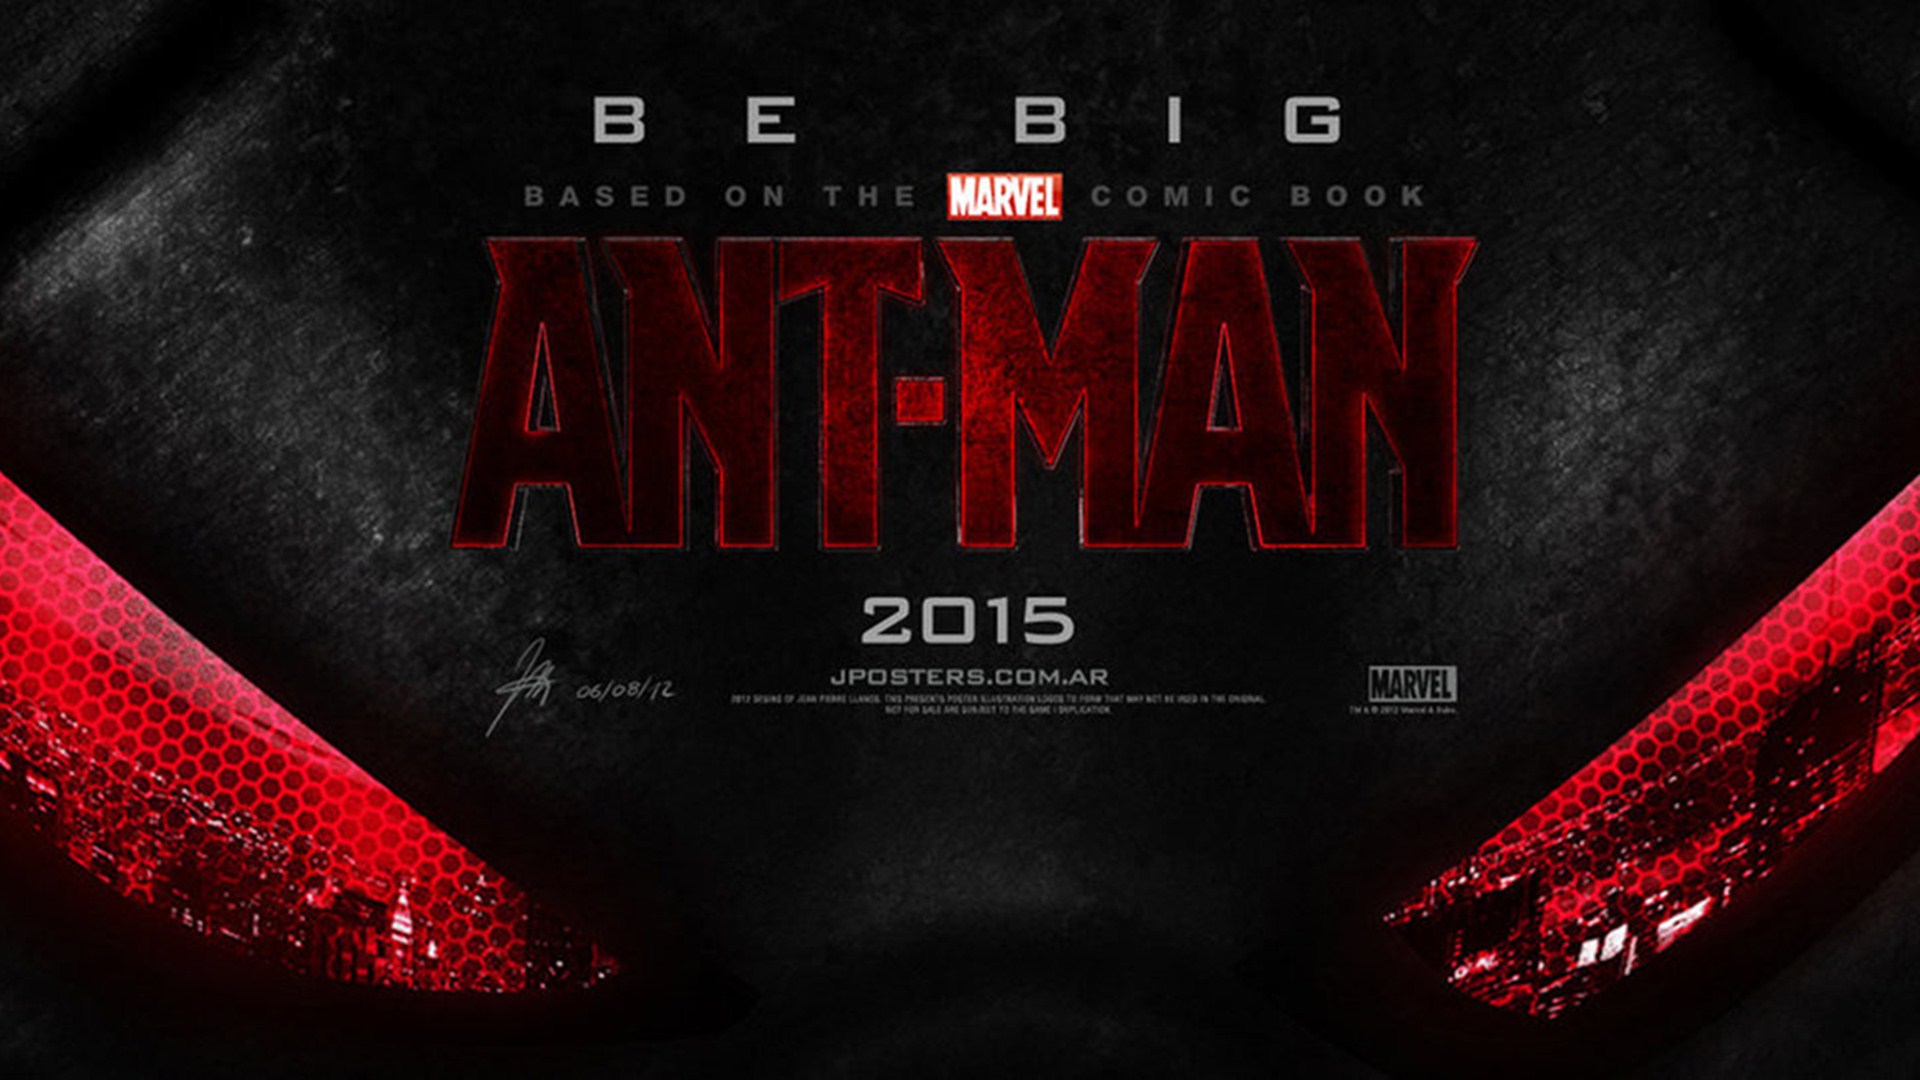 Download Marvel Comic Book Ant Man 2015 HD Wallpaper Search more high